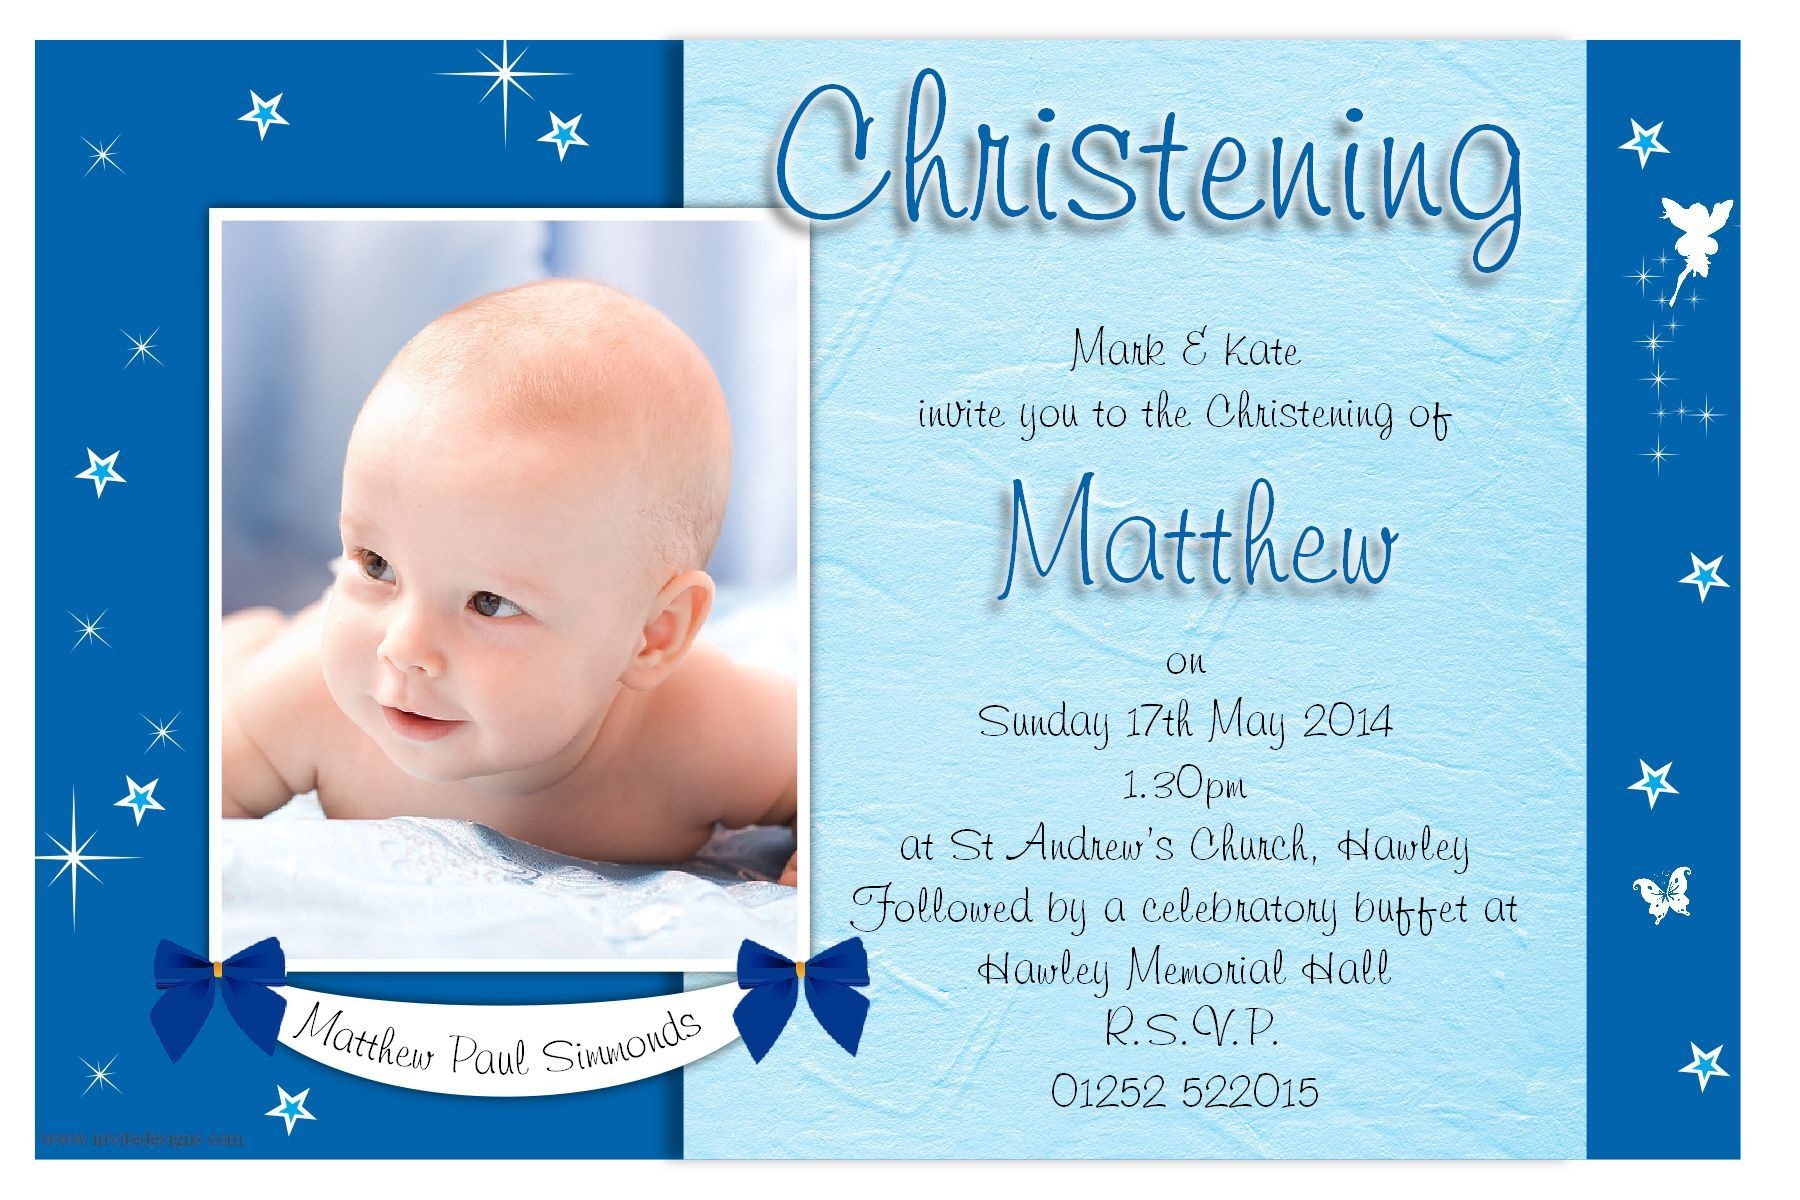 Free Christening Invitation Template Printable | Cakes In 2019 - Free Printable Personalized Baptism Invitations